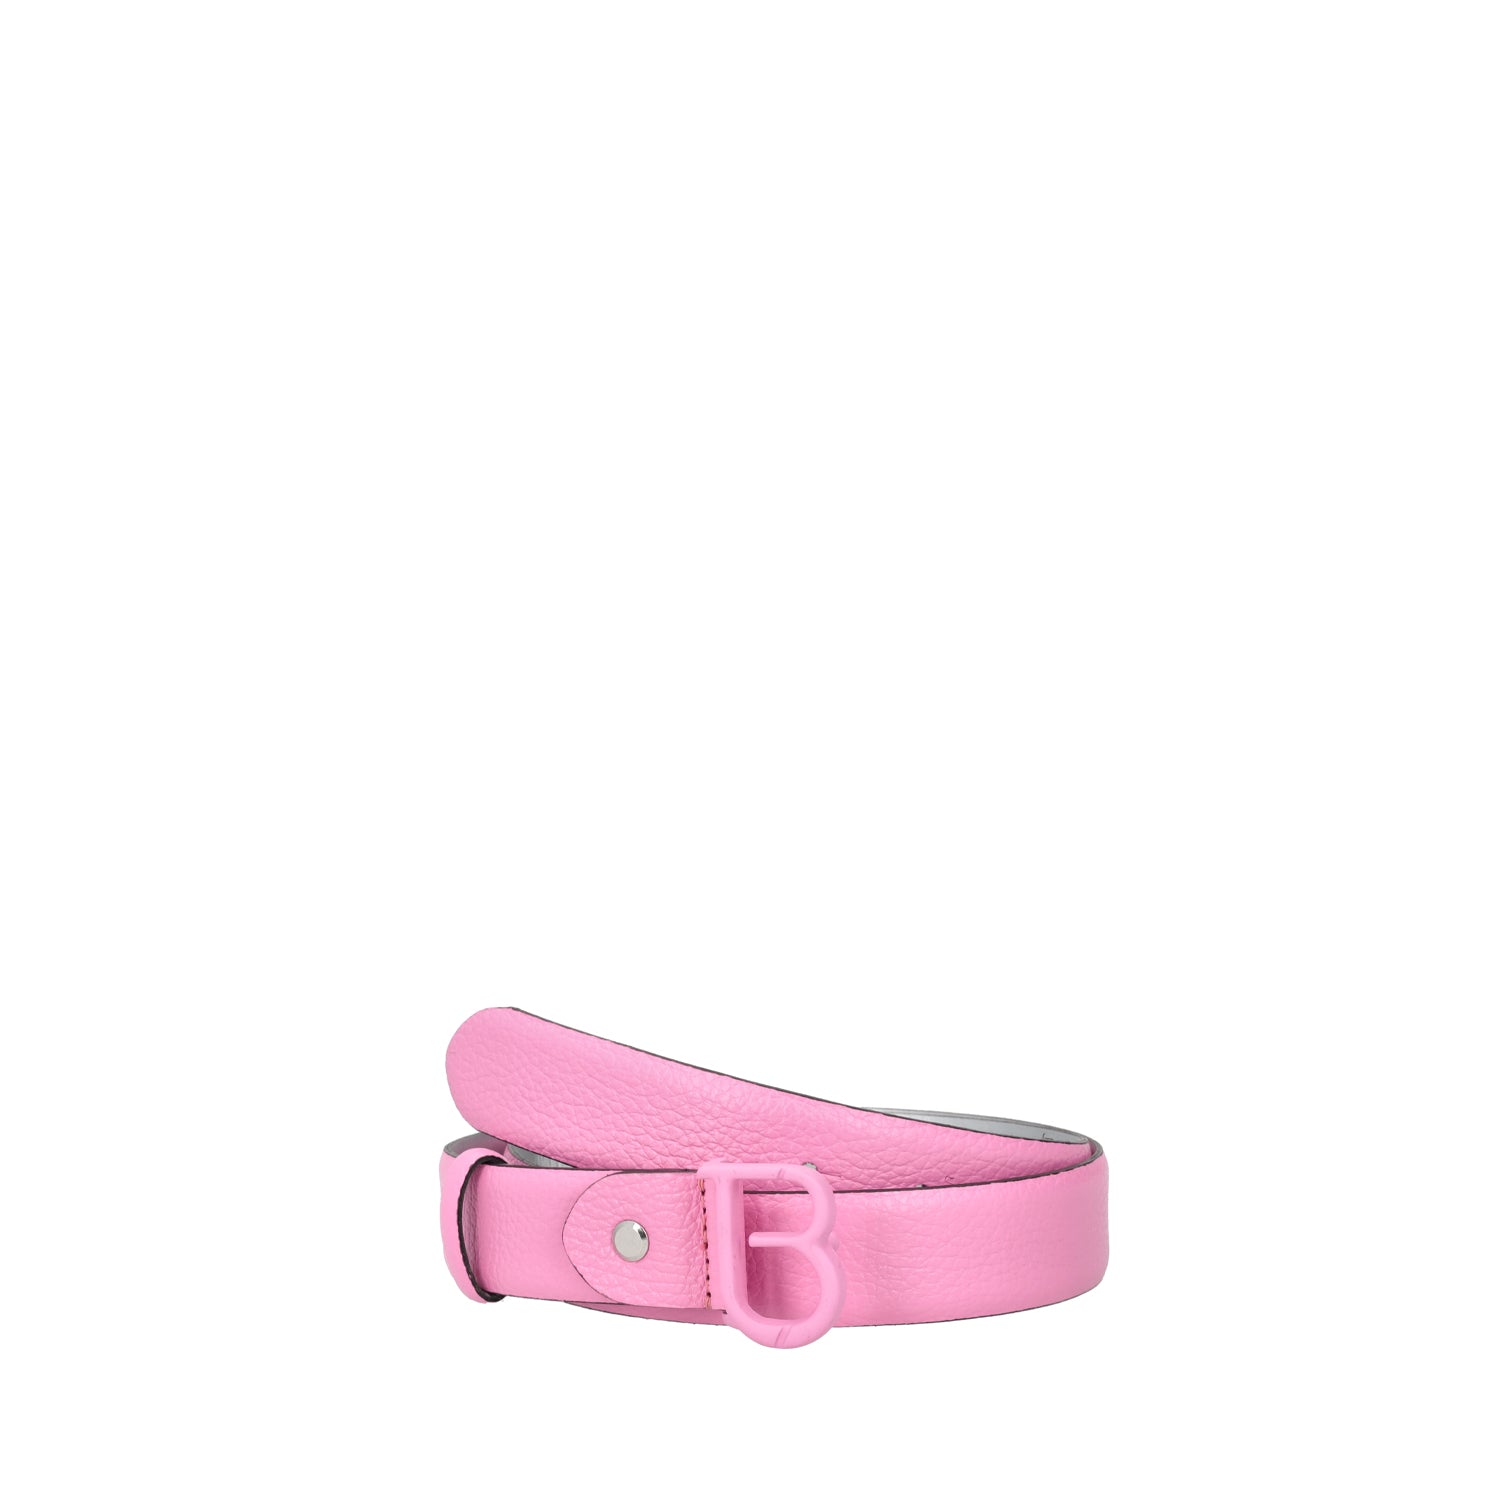 PINK ITALIAN MADE BELT IN LEATHER